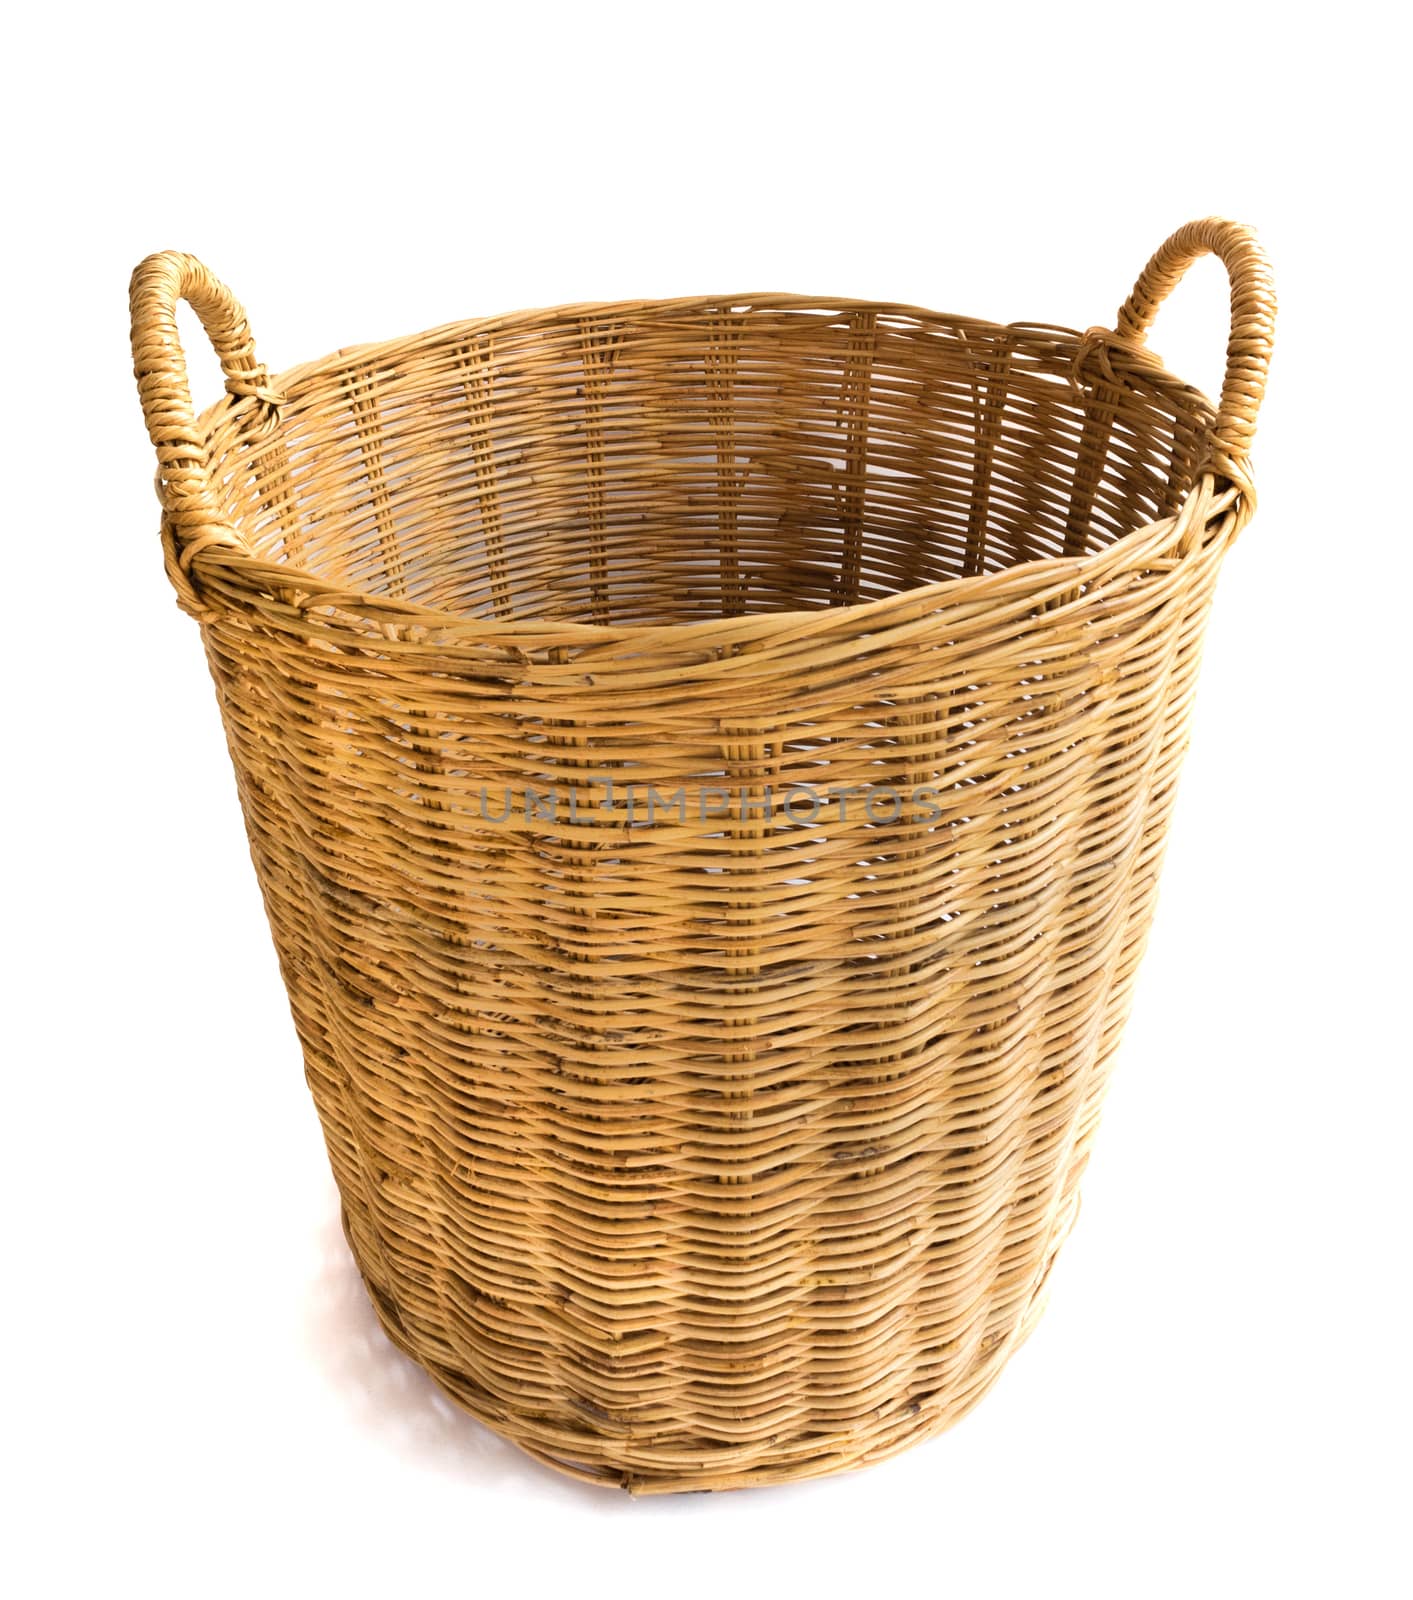 Wicker baskets on white background, workhouse concept